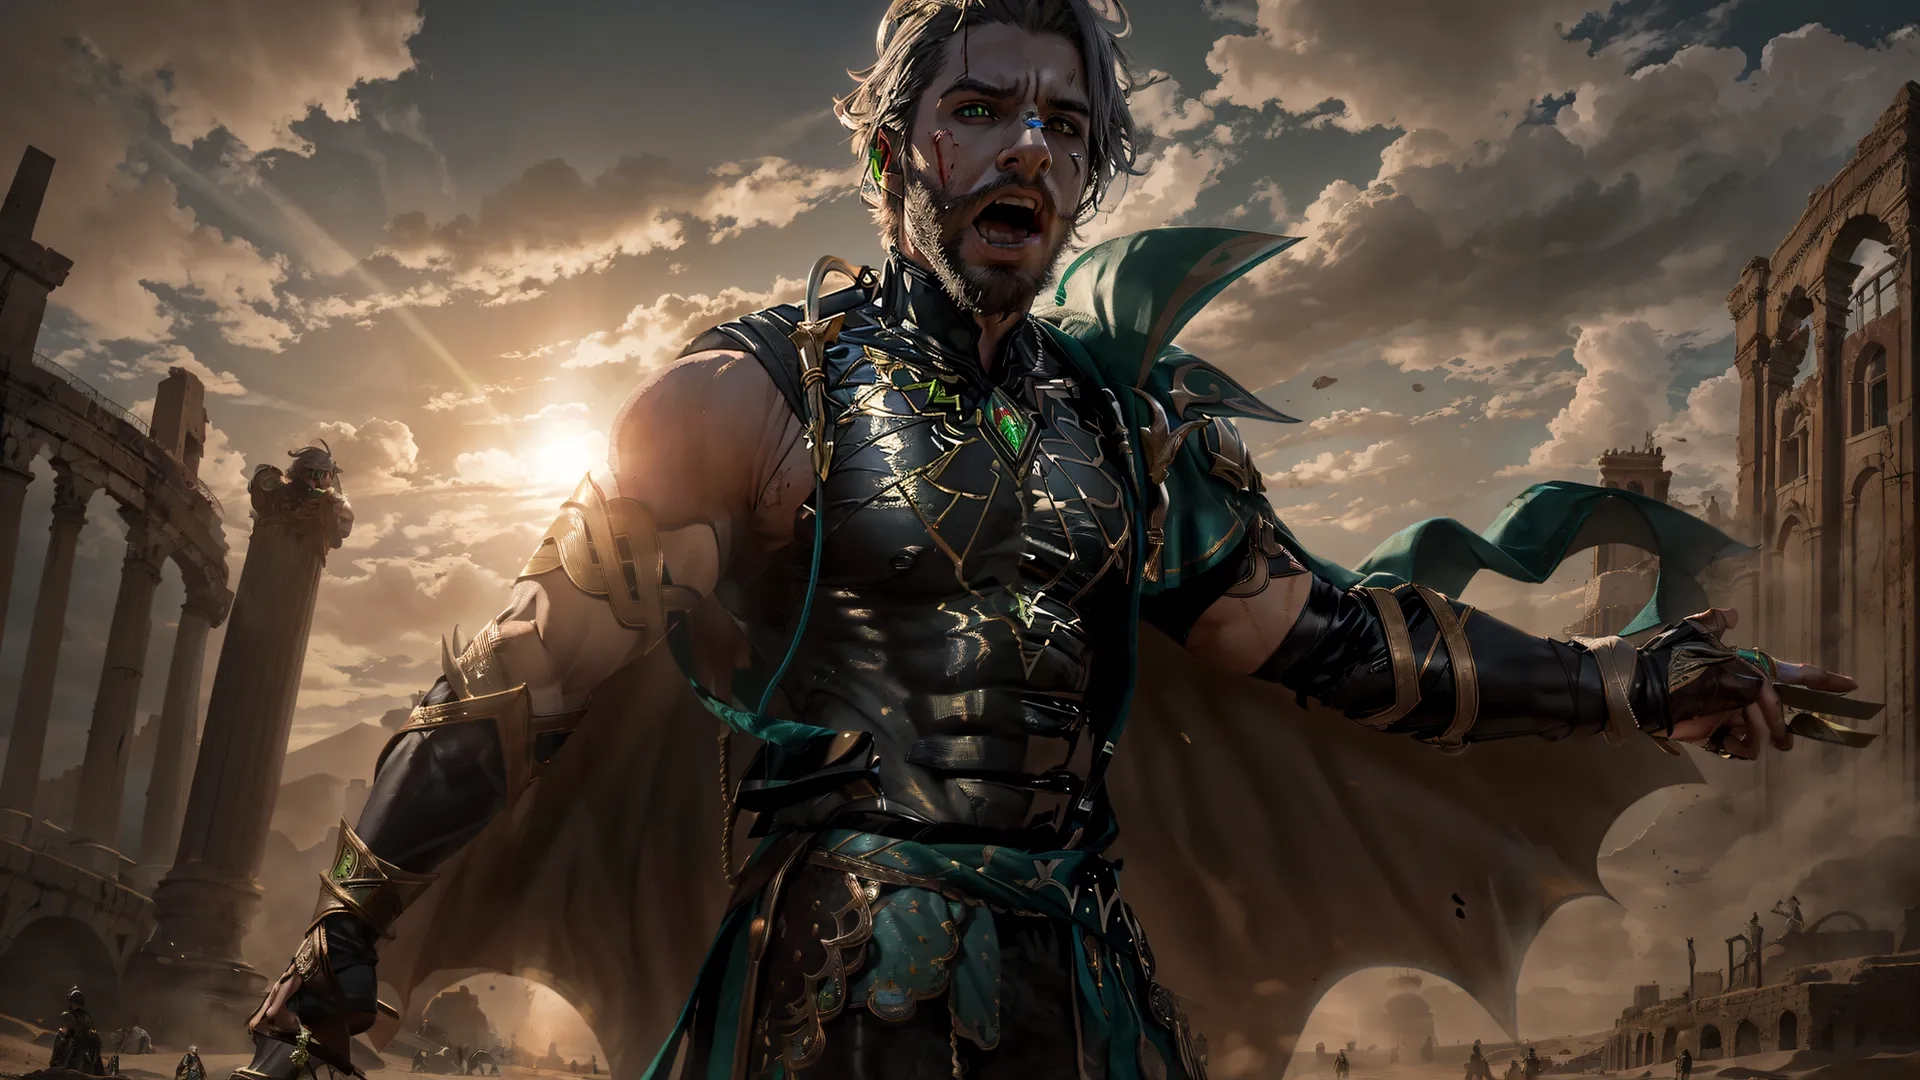 a male character stands with arms out in front of a city street while holding a green object with one hand and making face expression of emotion
